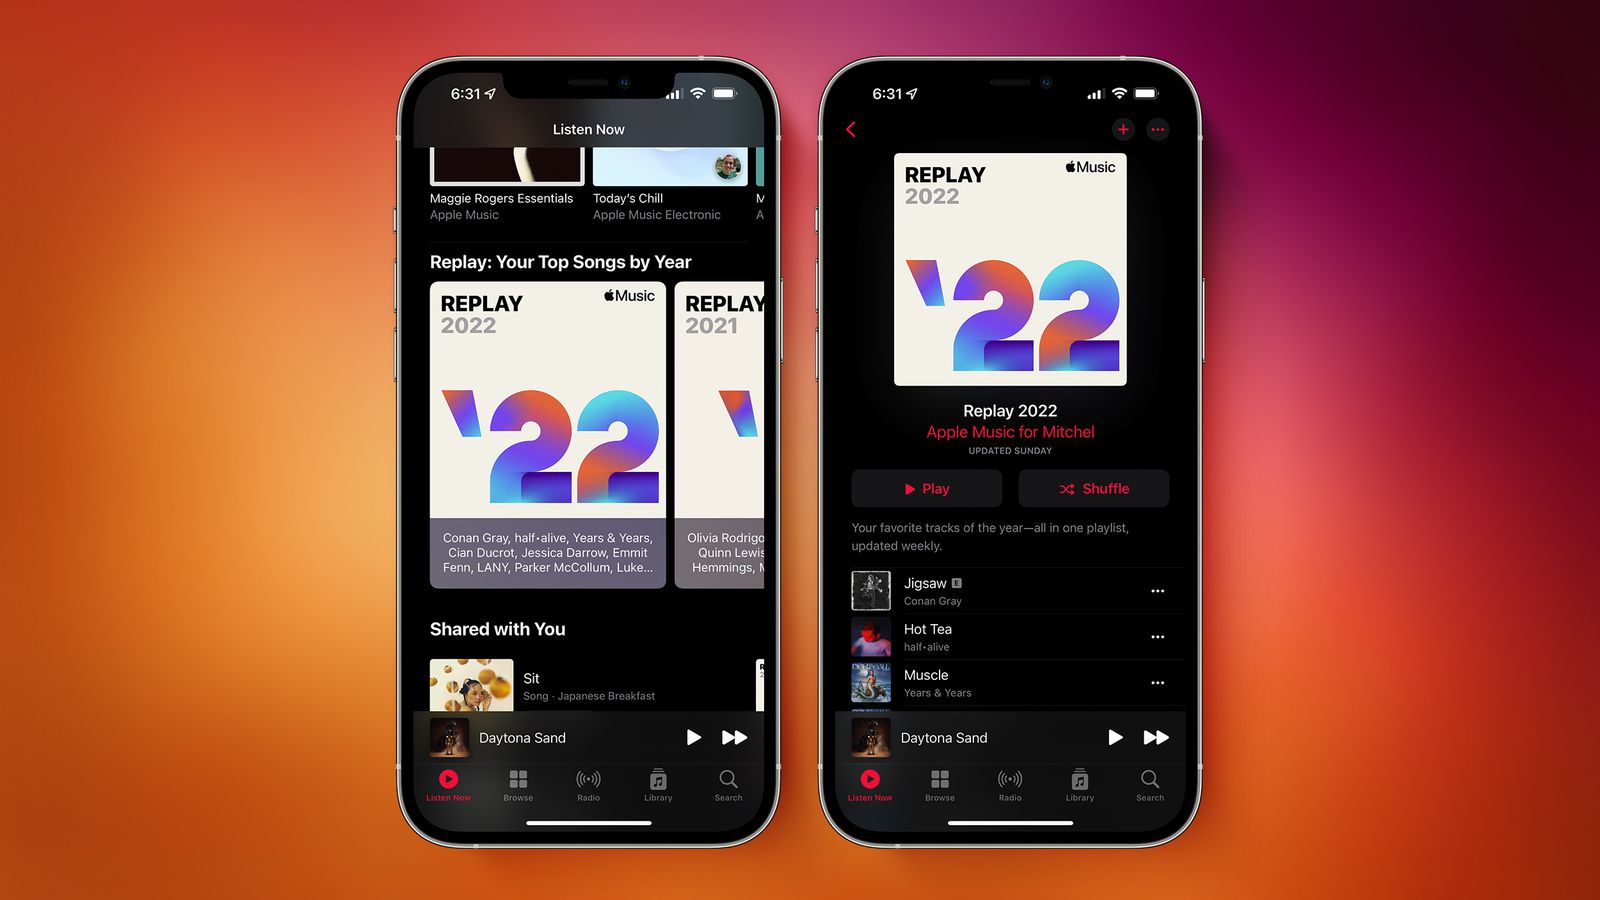 Apple Music 'Replay 2022' Playlist Now Available - MacRumors